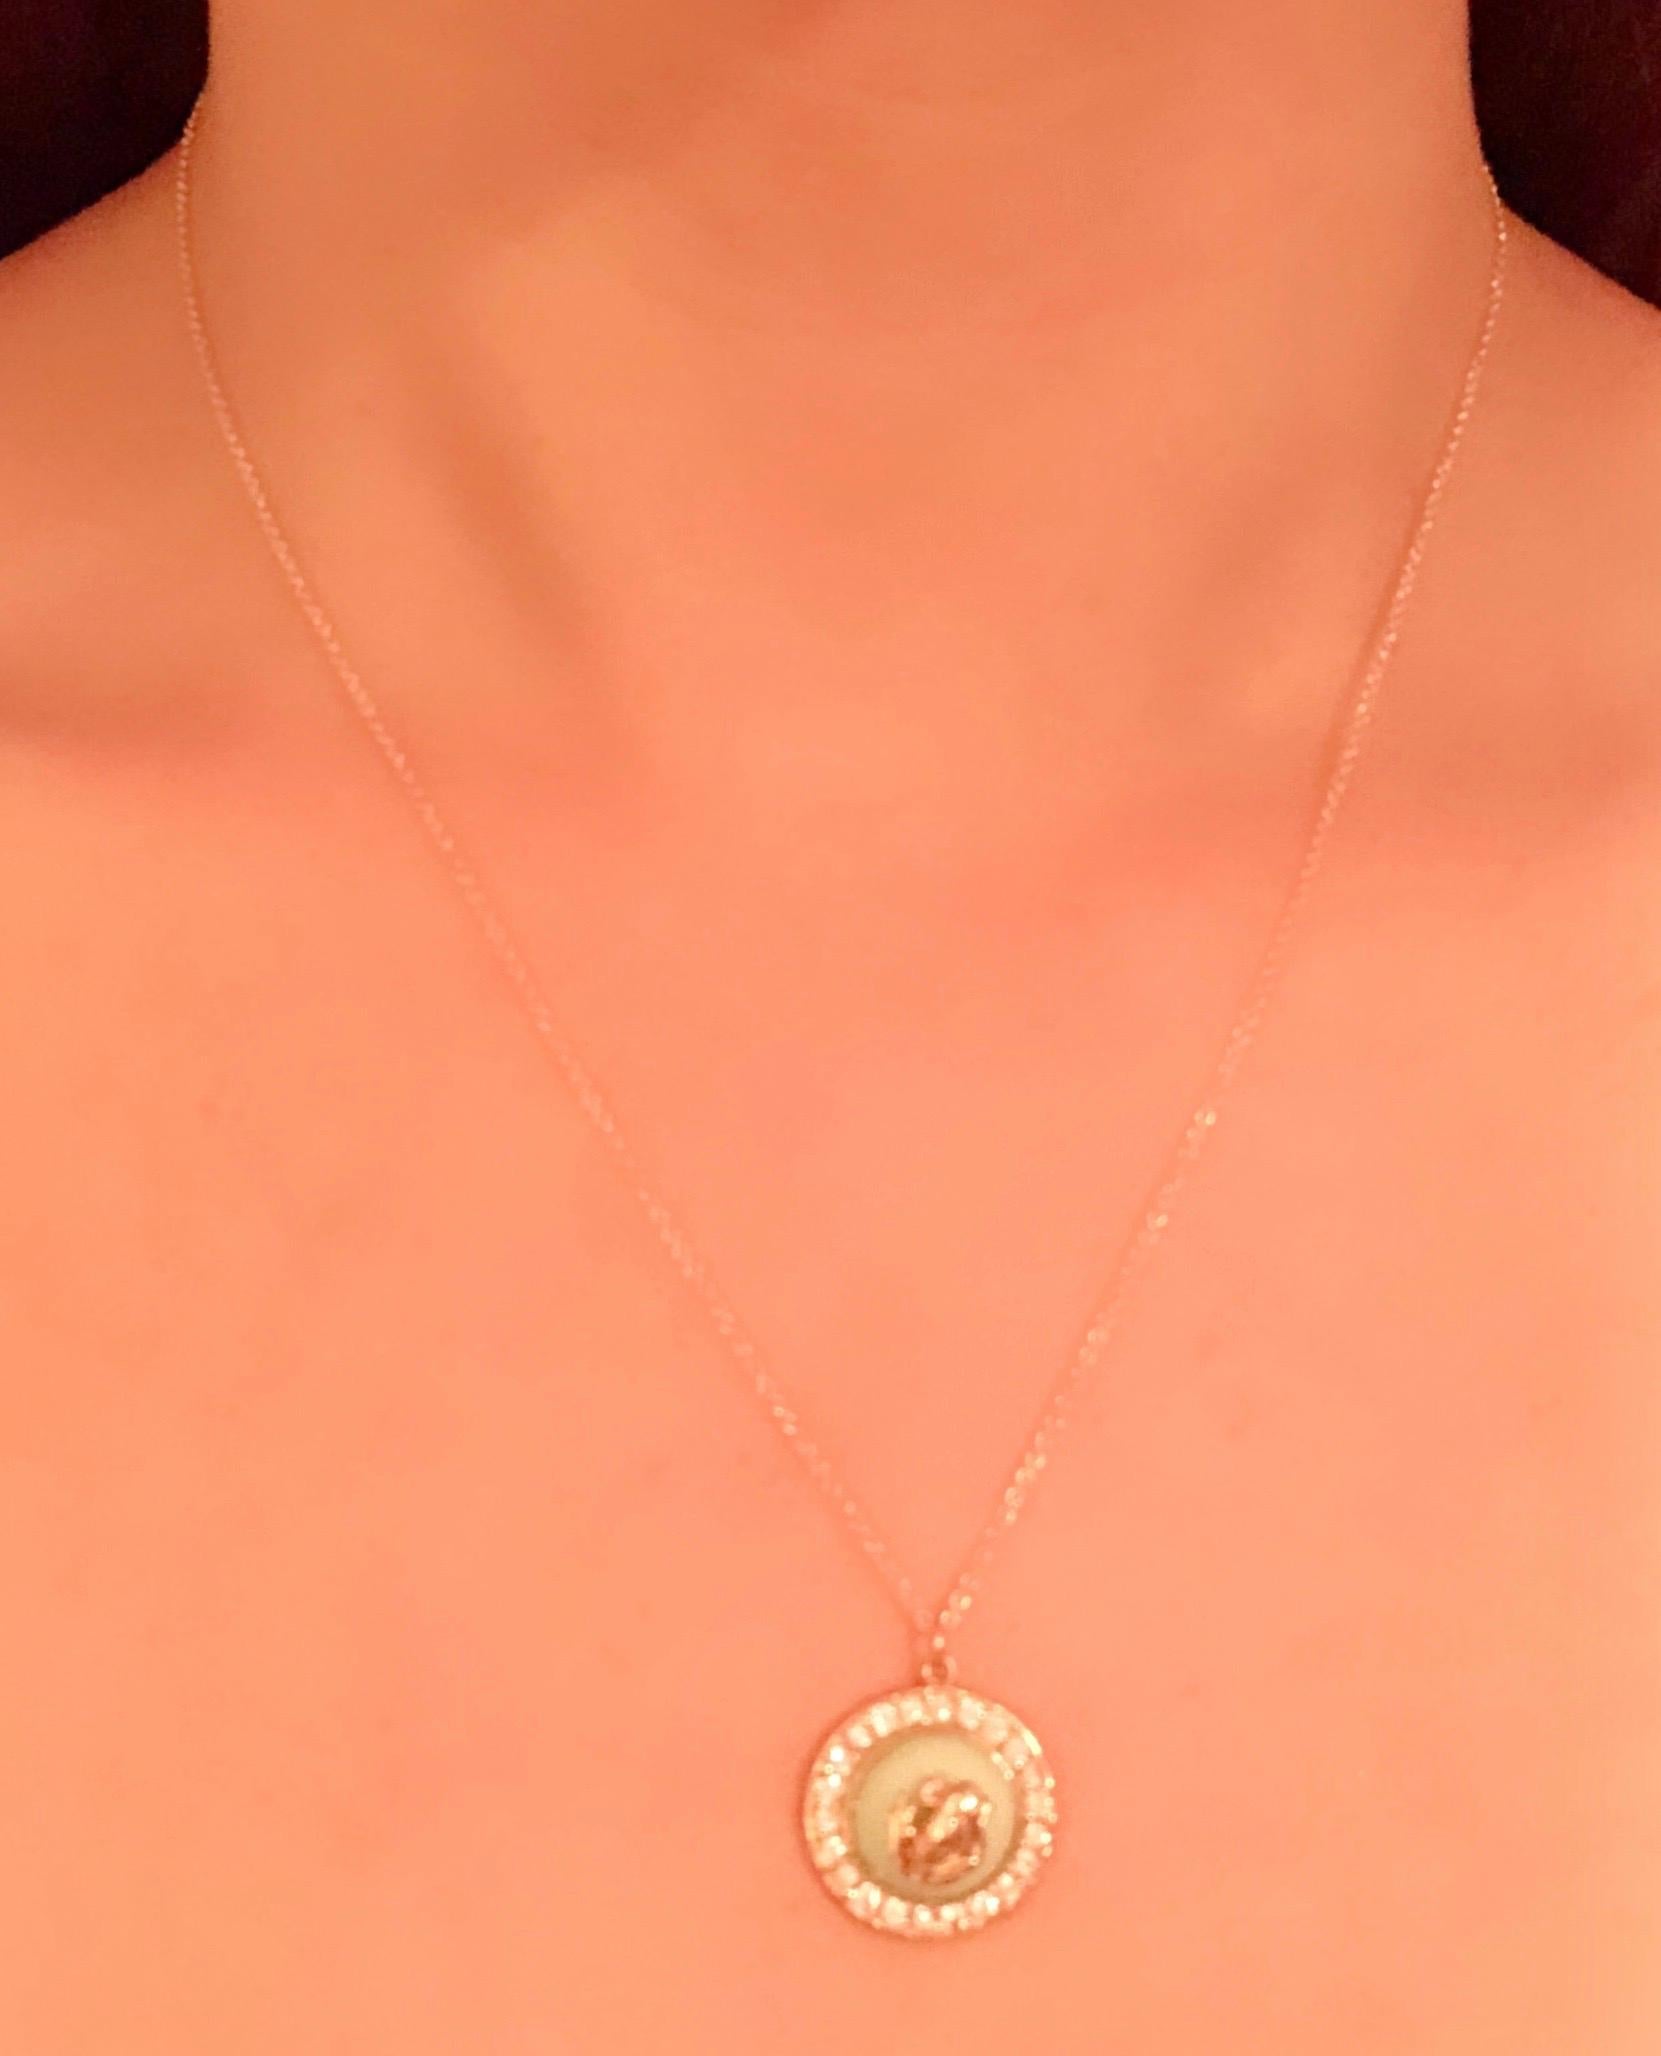 Gold Necklace Diamond Encrusted Pendant, Center Stone with Gold Frog. 18KT For Sale 5